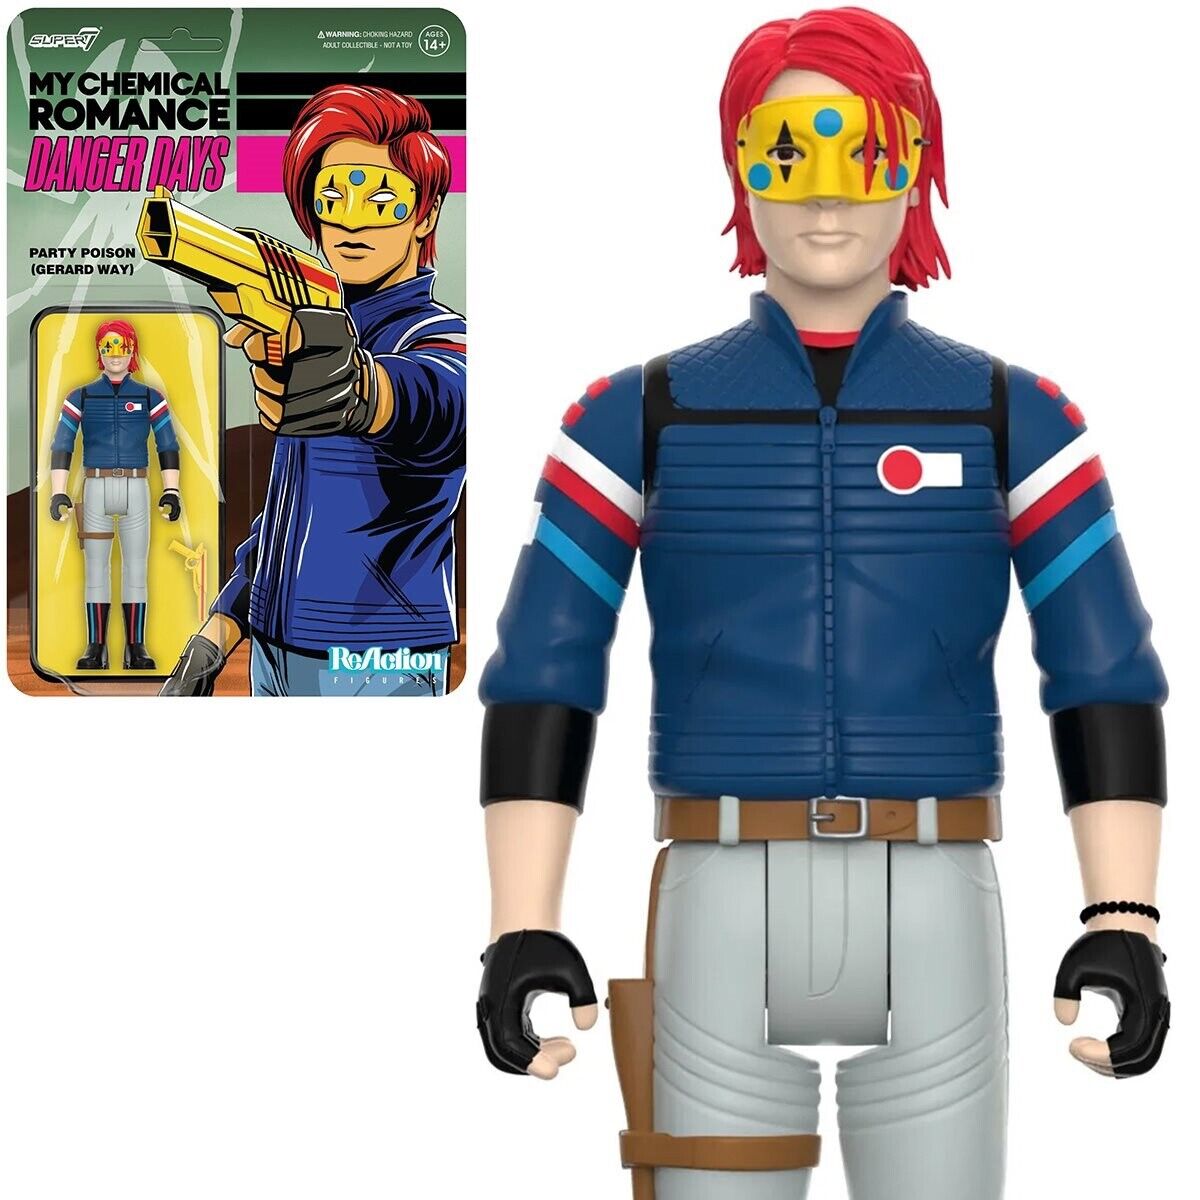 Super7 • My Chemical Romance • Danger Days Party Poison • 3 ¾ inch • Ships Free